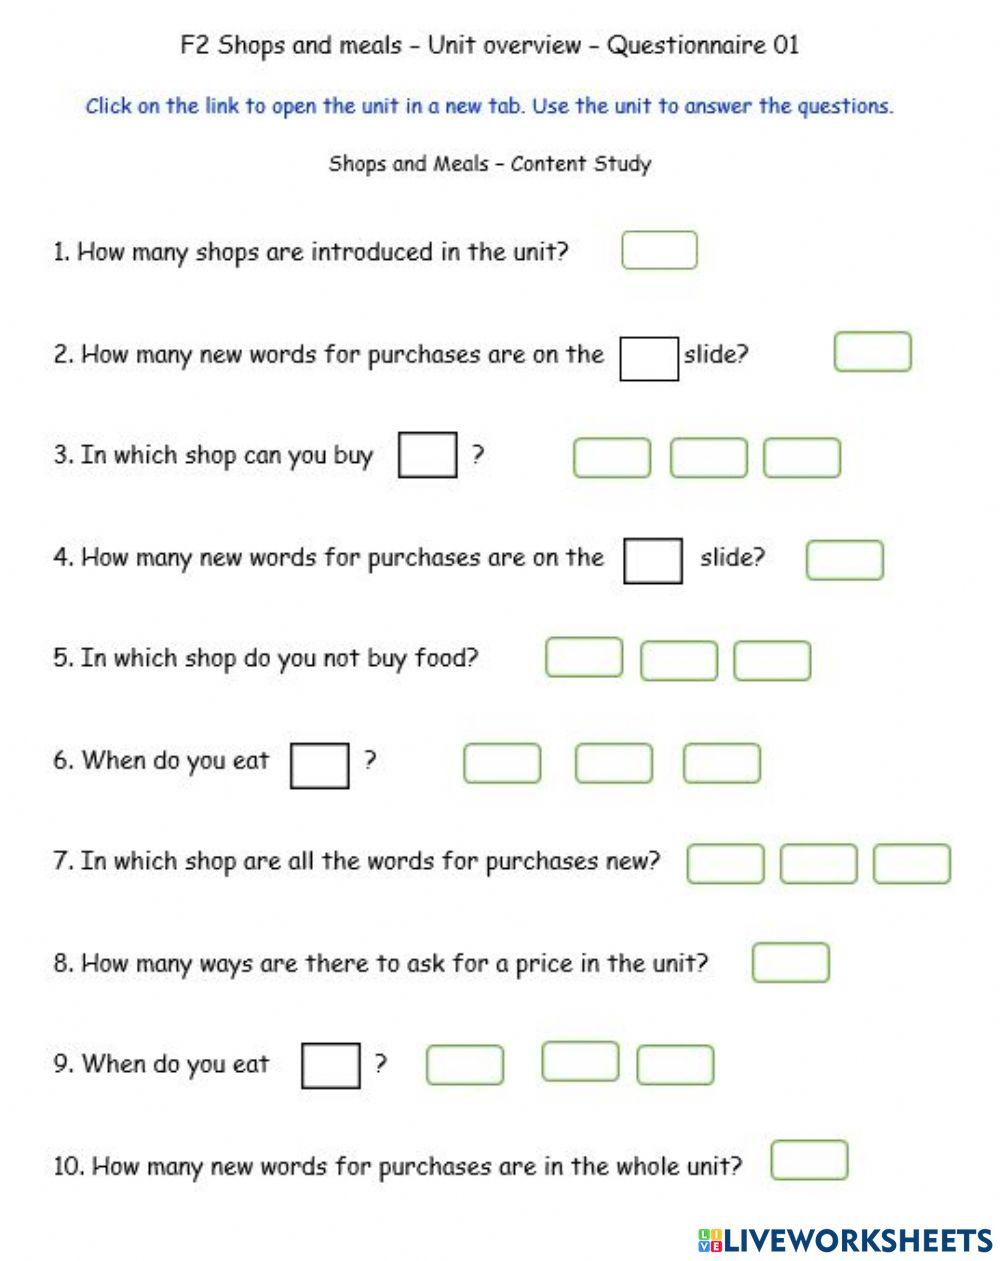 F2 - Shopping and Meals - Unit Questionnaire